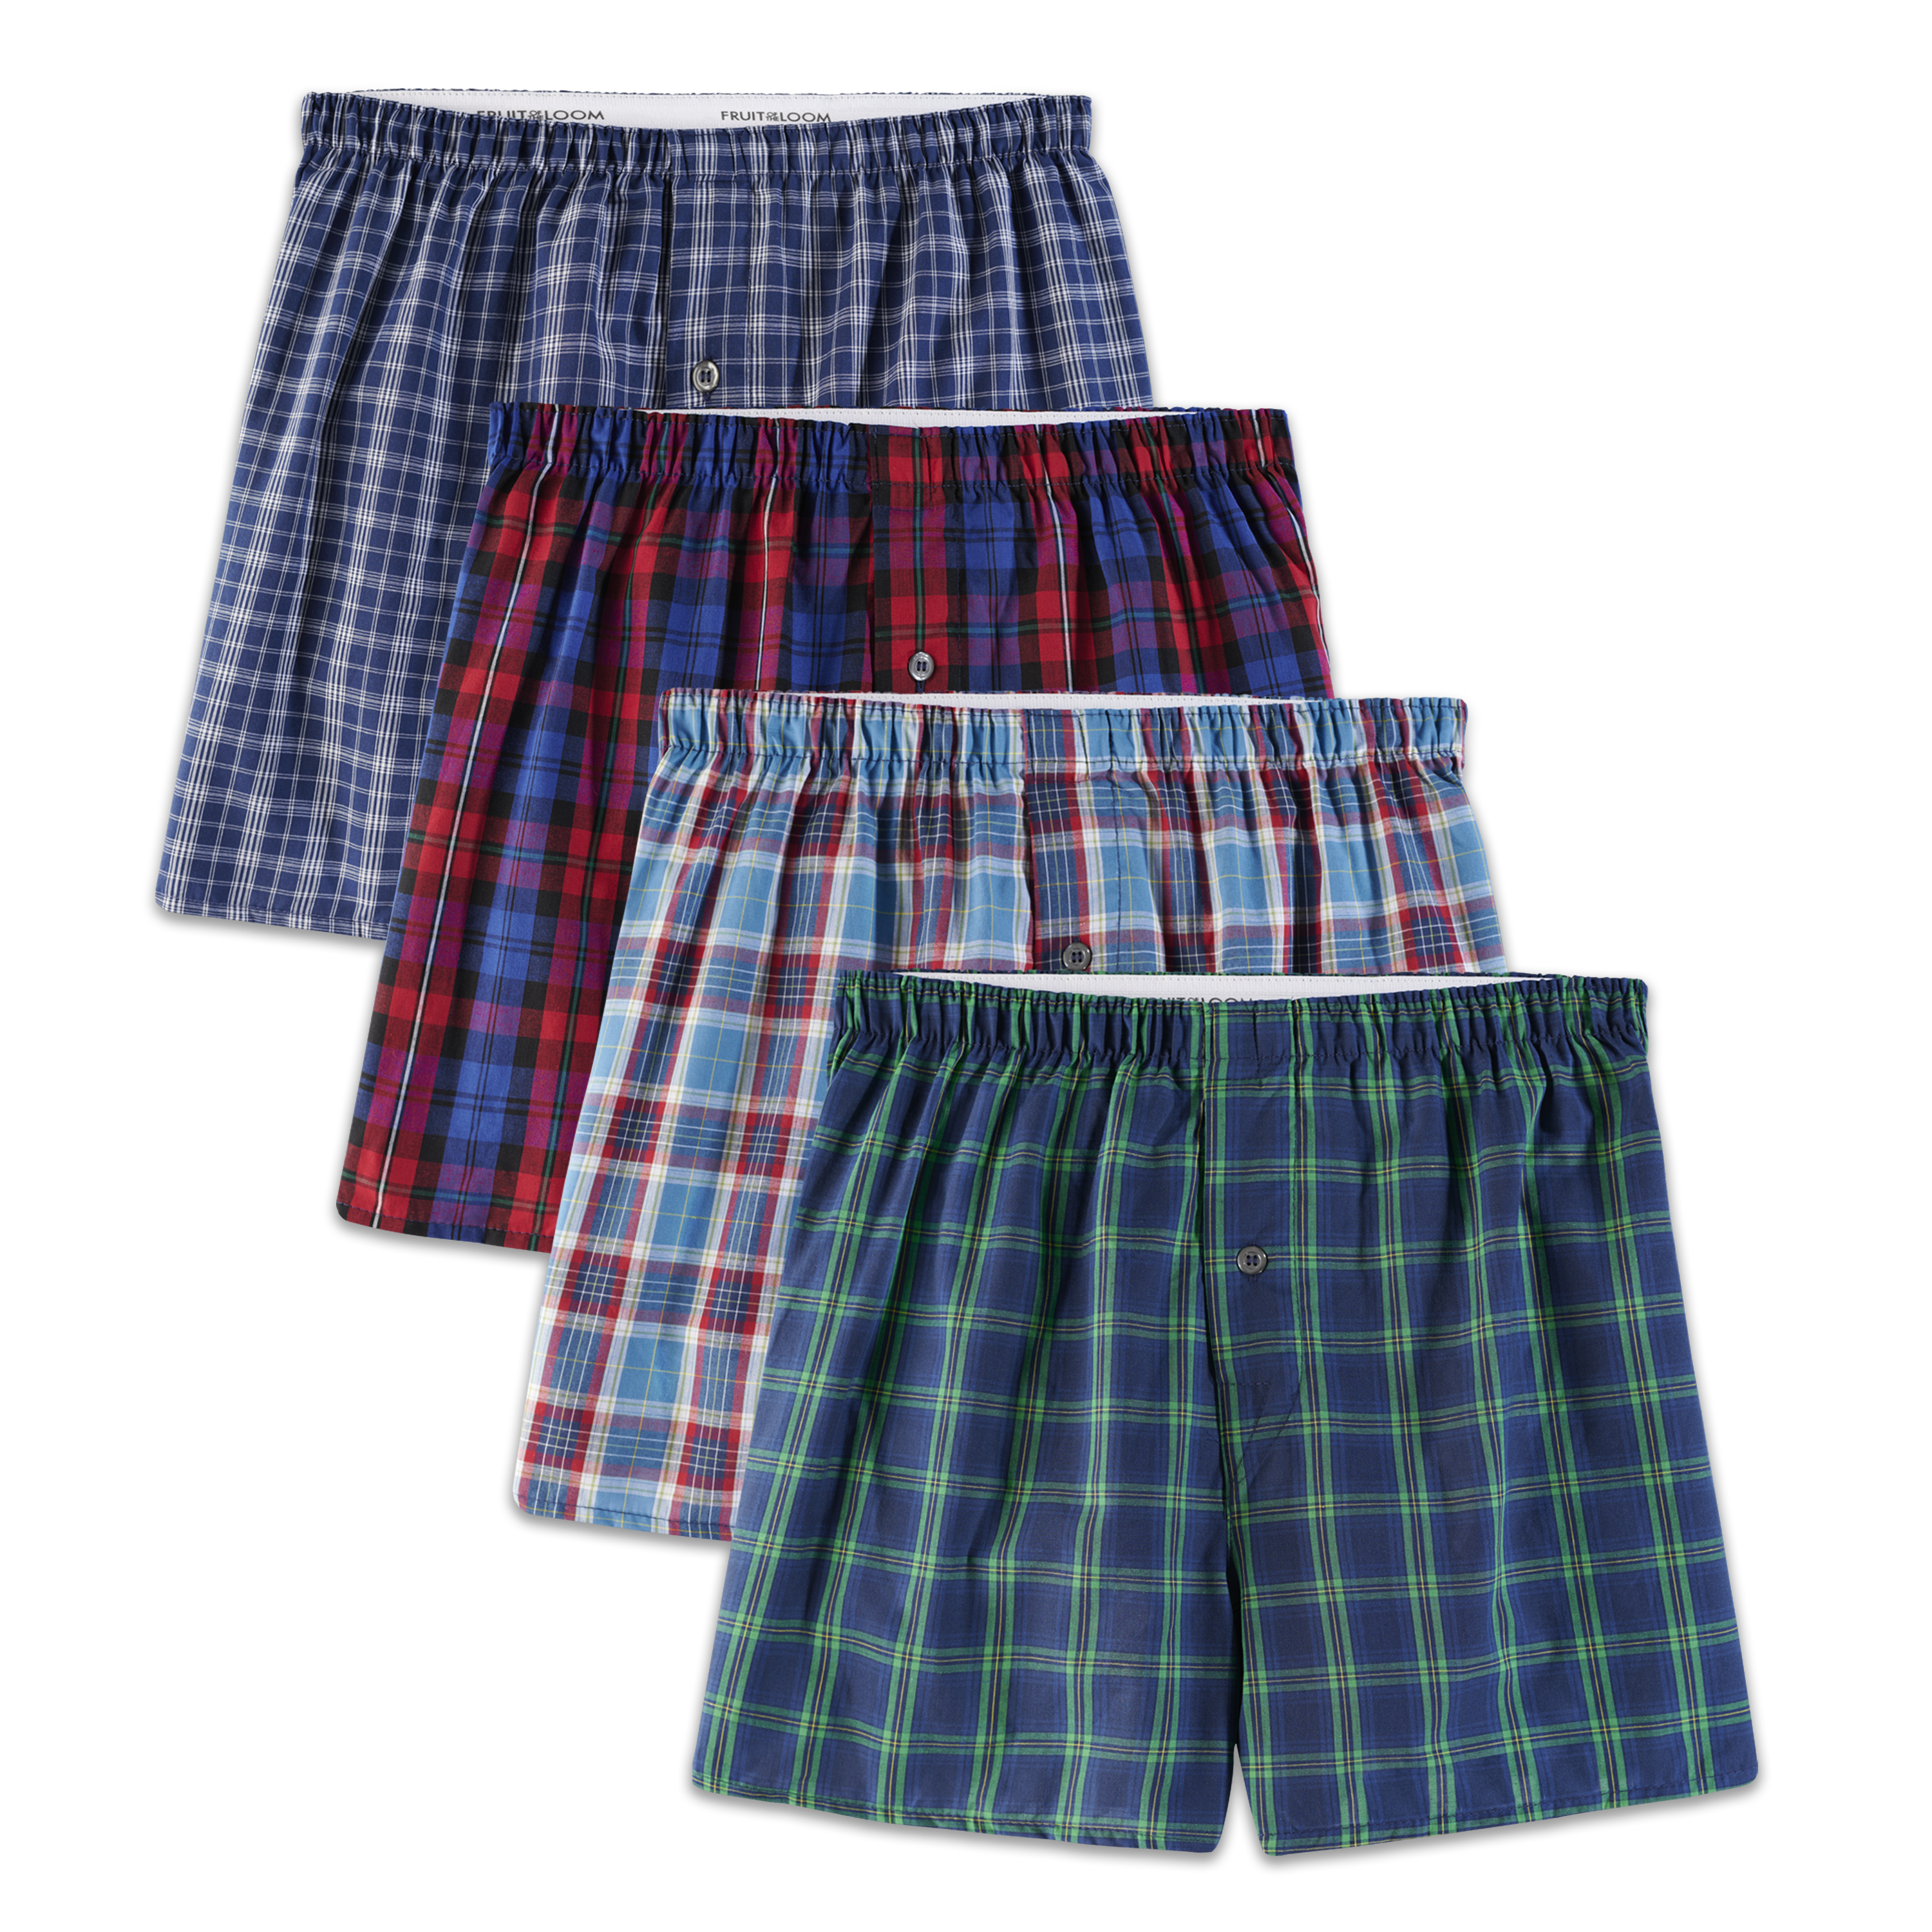 Fruit of the Loom Men's Premium Woven Plaid Boxers, Assorted 4 Pack